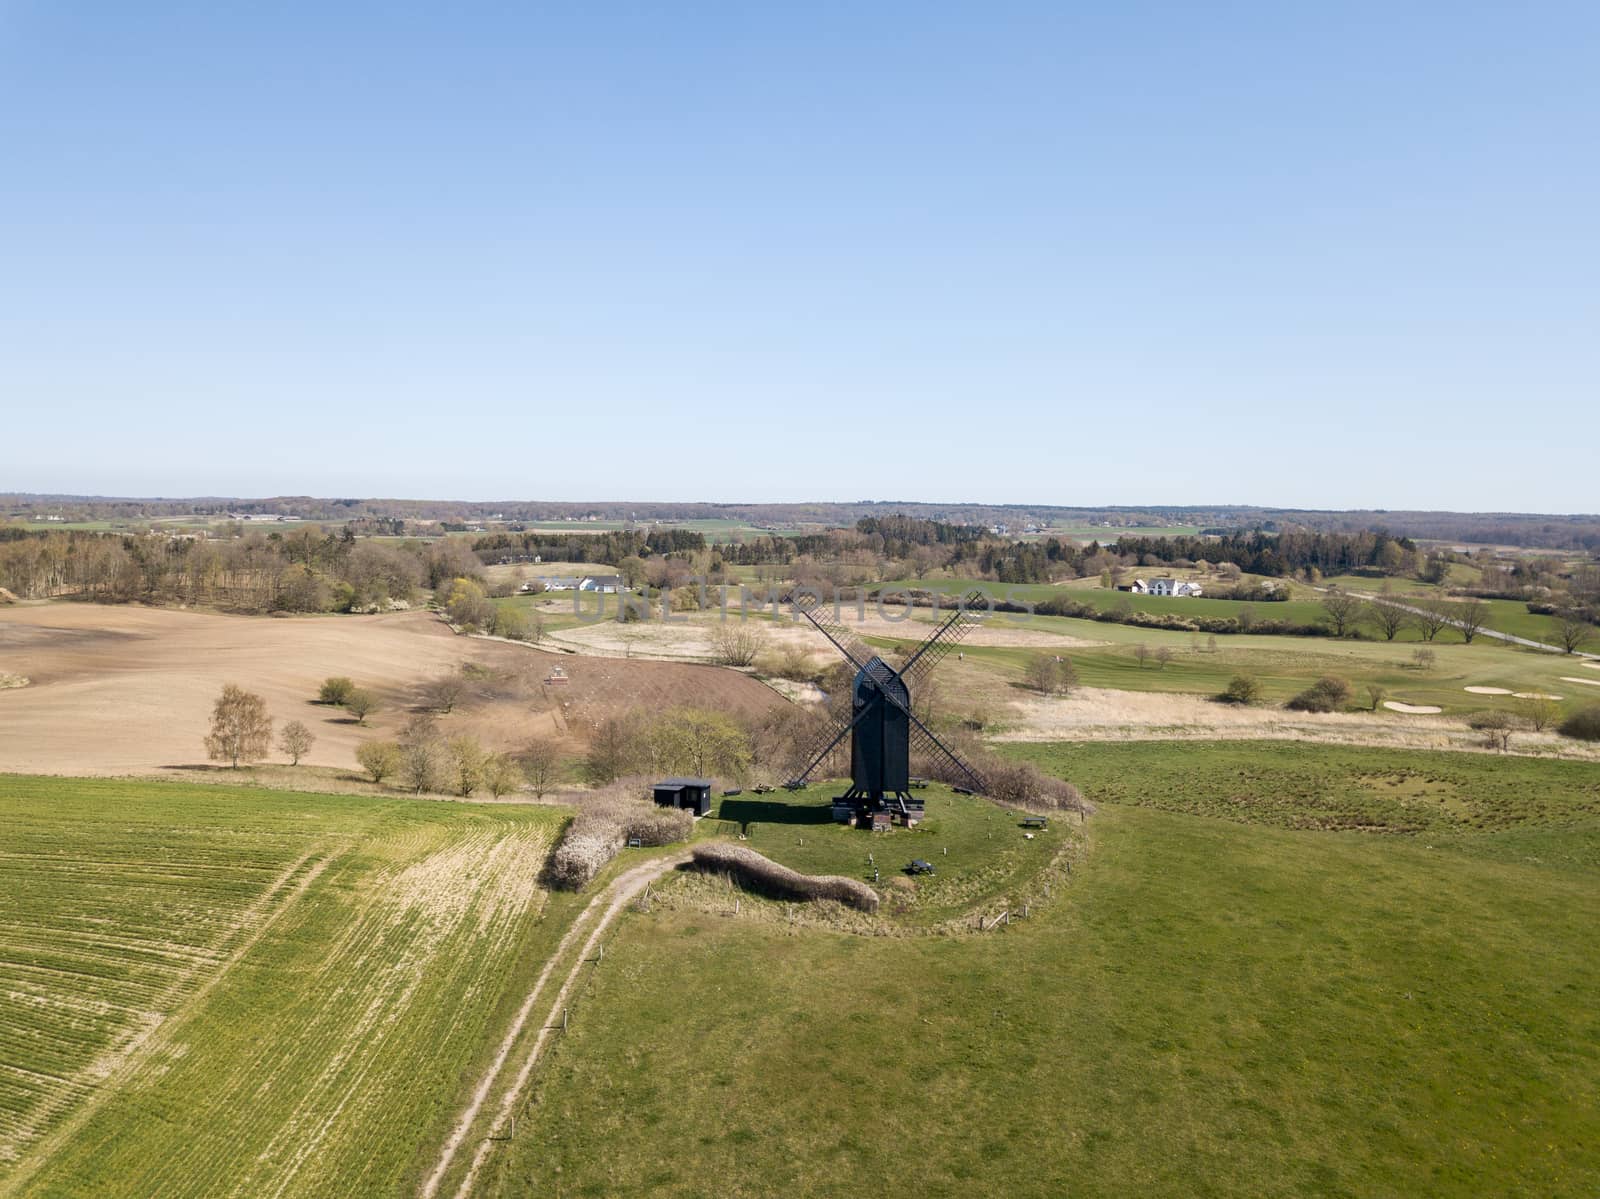 Hoejerg, Denmark - April 23, 2019: Aerial view of the historic Danish windmill called Pibe Moelle.